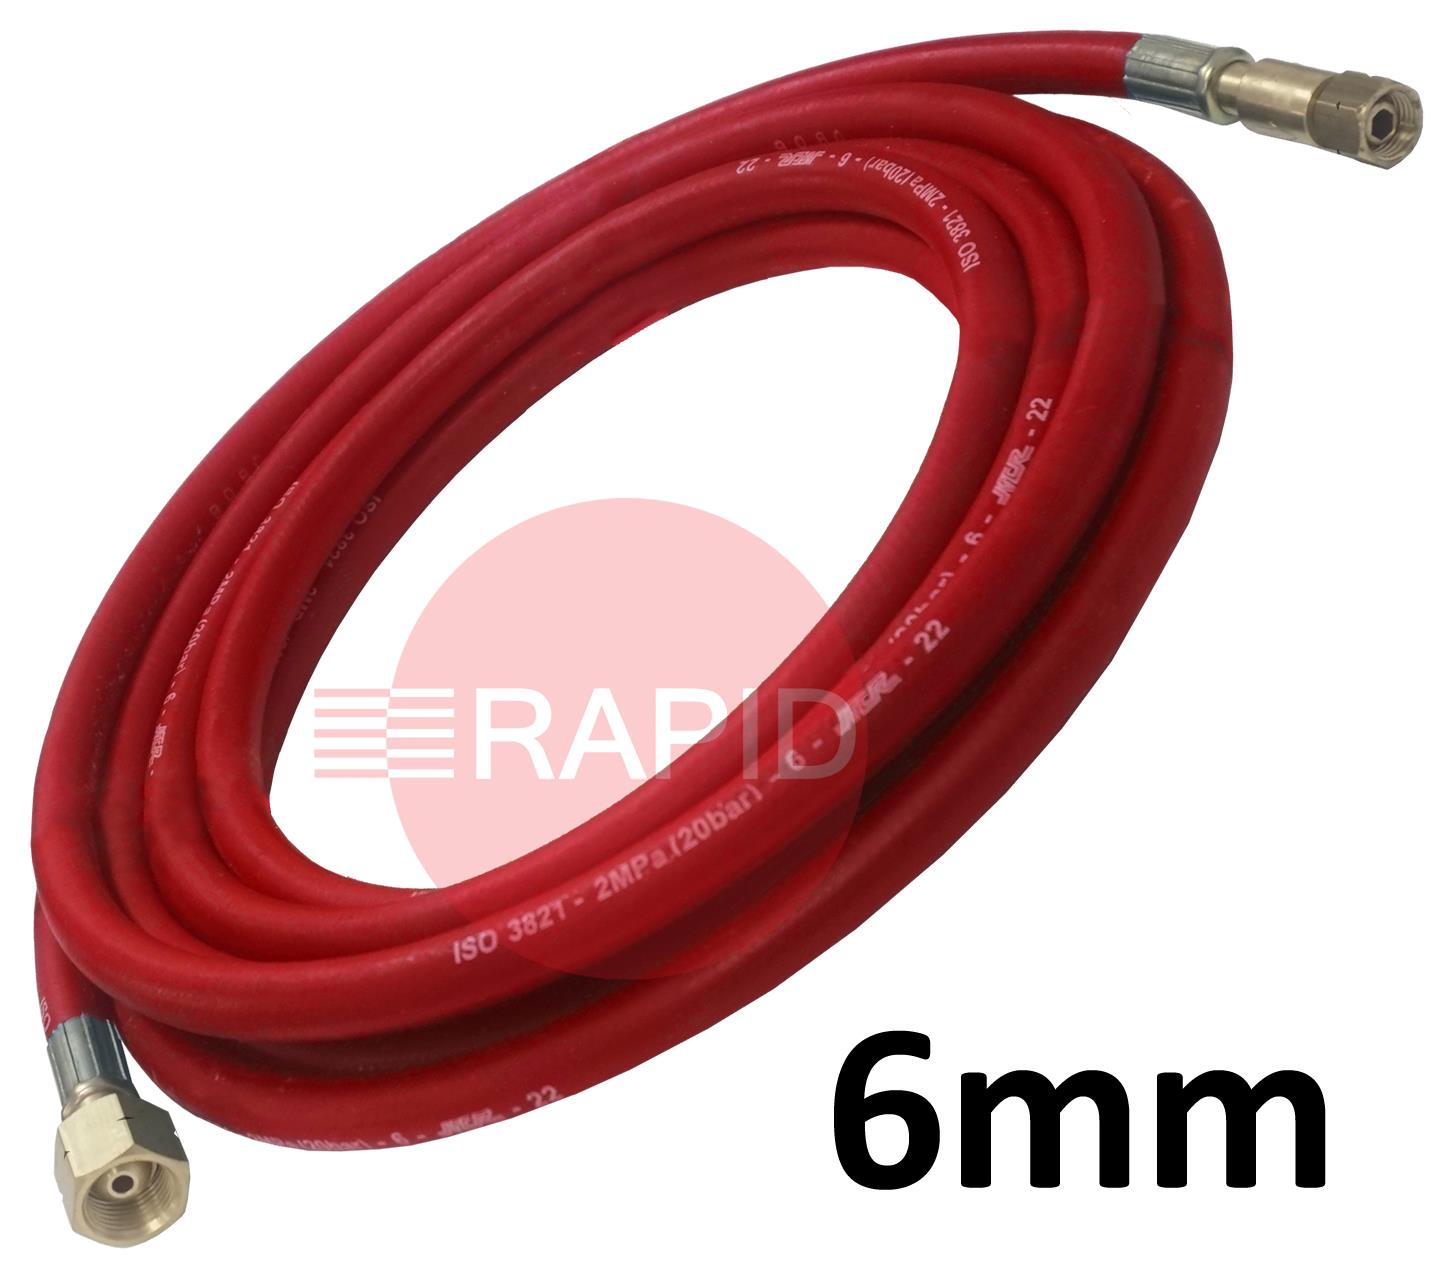 A5120  Fitted Acetylene Hose. 6mm Bore. G1/4 Check Valve & G3/8 Regulator Connection - 5m